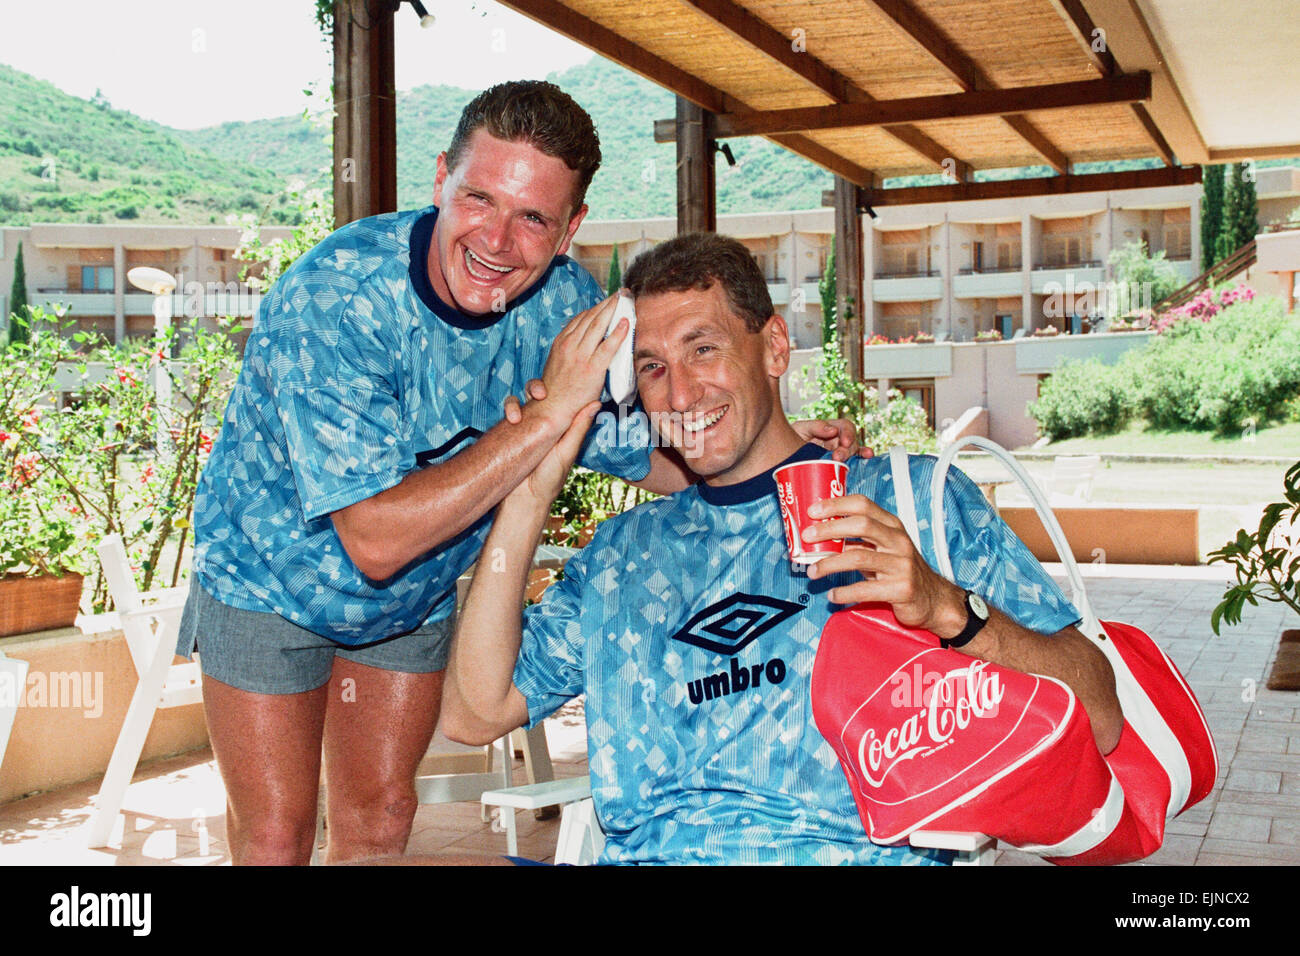 1990 World Cup Finals in Italy. England footballers Paul Gascoigne (left) and Terry Butcher in relaxed mood at the England team base in Italy. June 1990. Stock Photo